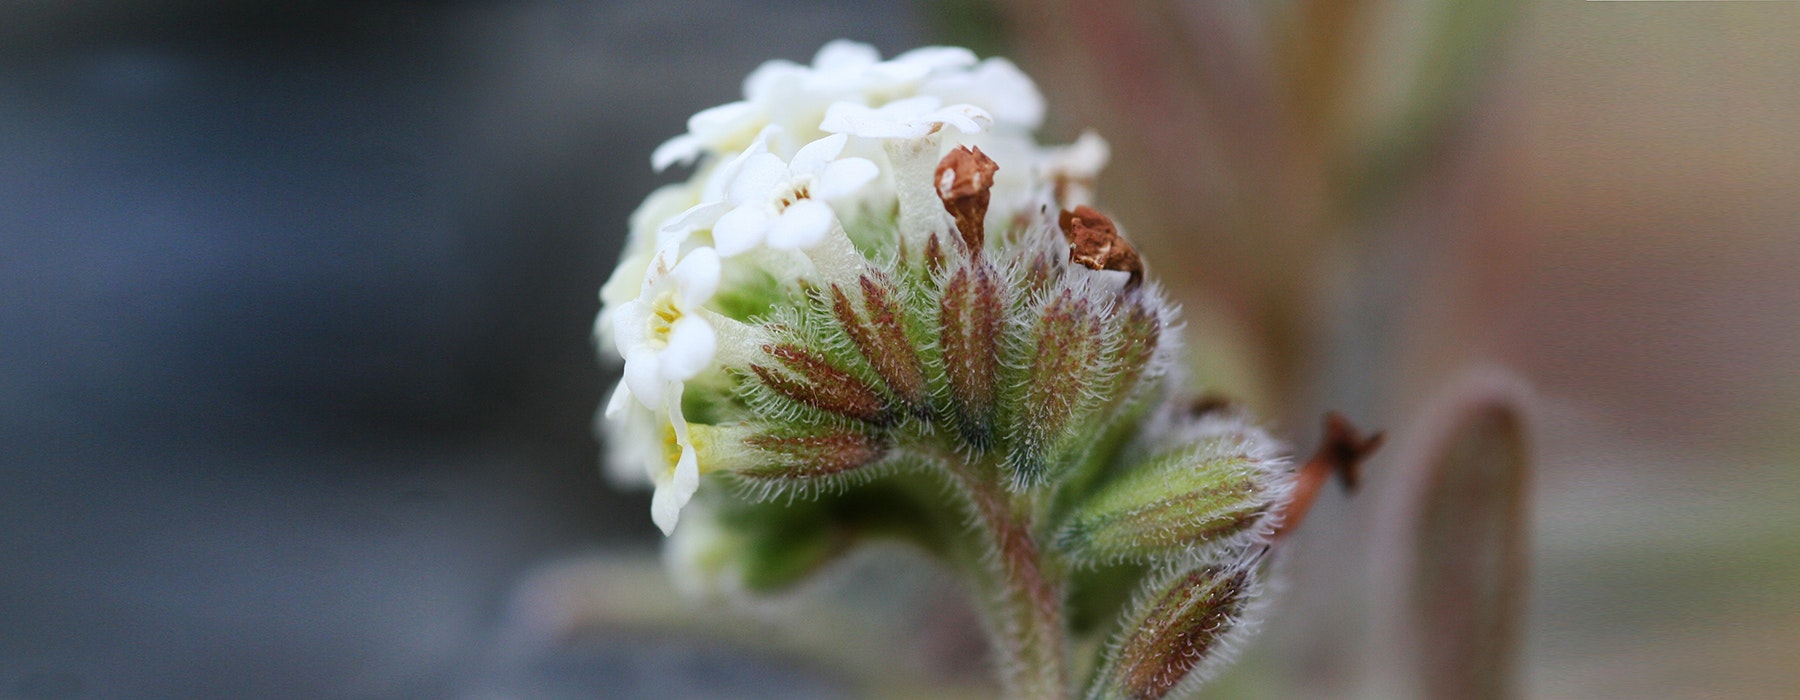 A white flowering plant with a blurred background